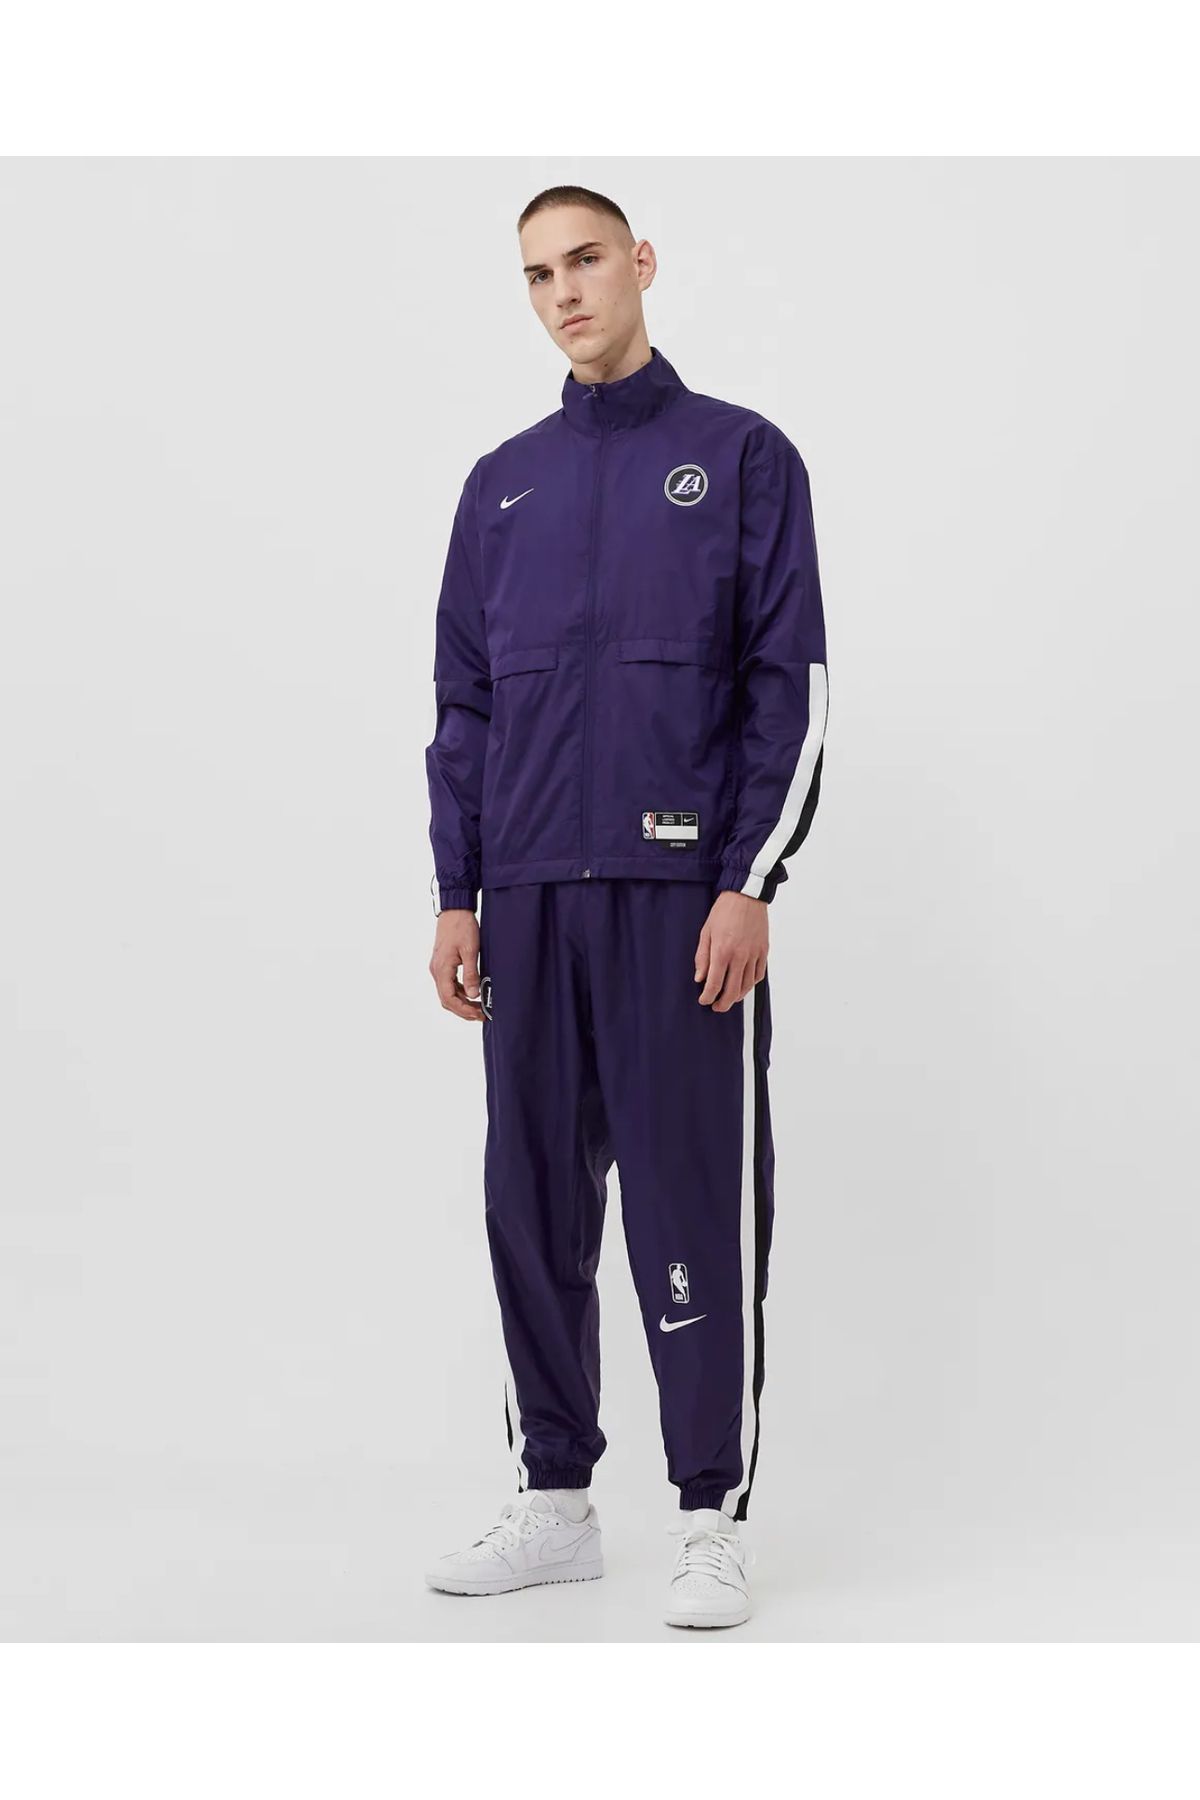 Nike NBA LOS ANGELES LAKERS COURTSIDE CITY EDITION